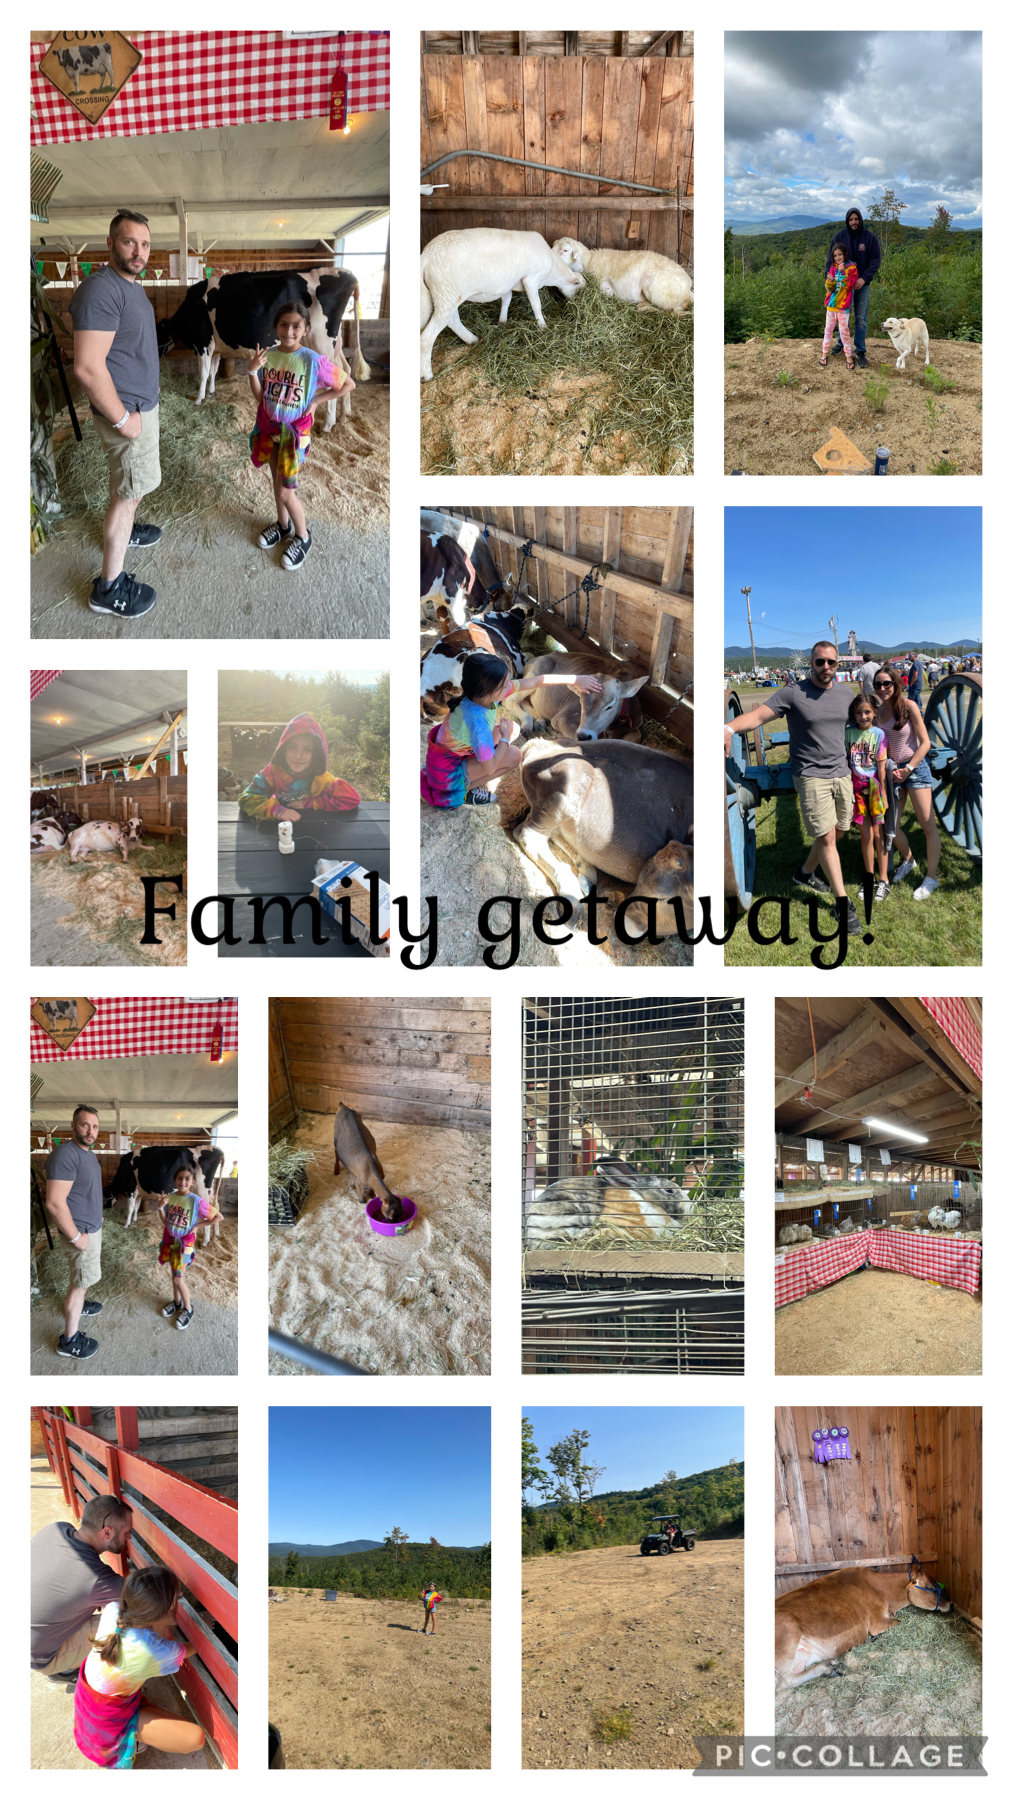 It was so fun! What are you all up to? #familygetaway #animals #lancasterfair